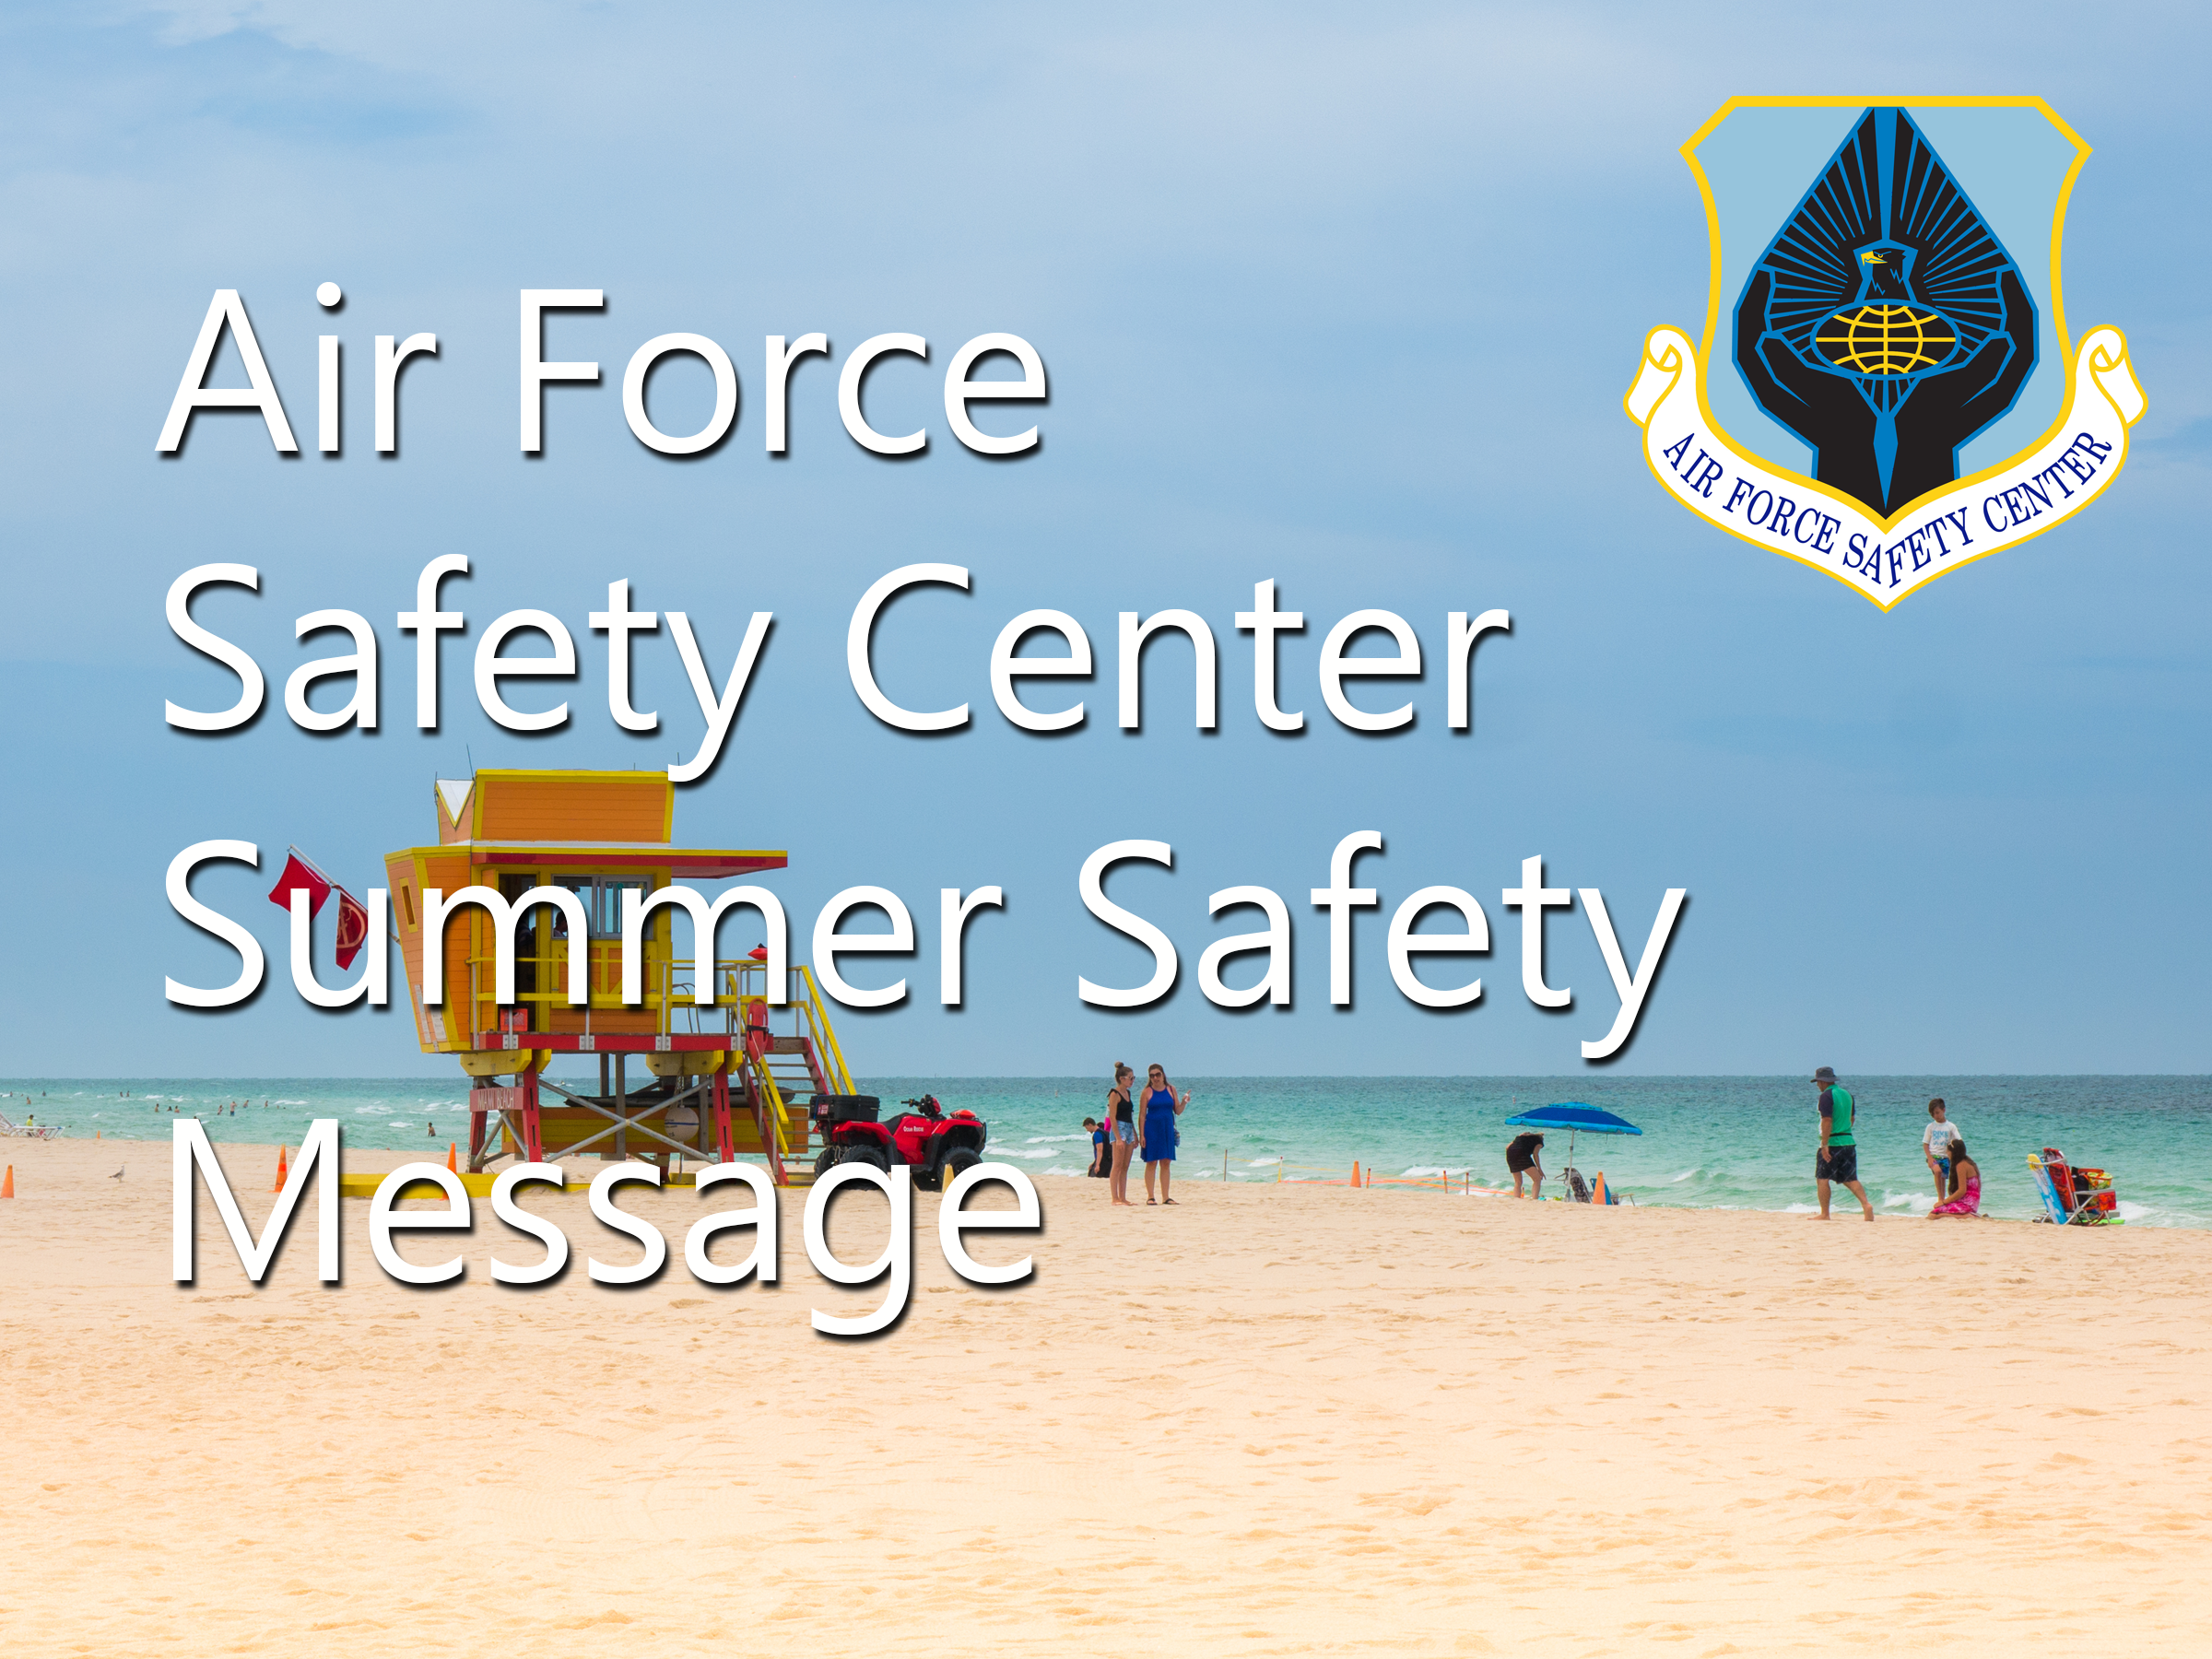 Air Force Safety Center Summer Message- Beach with lifeguard stand with people on beach